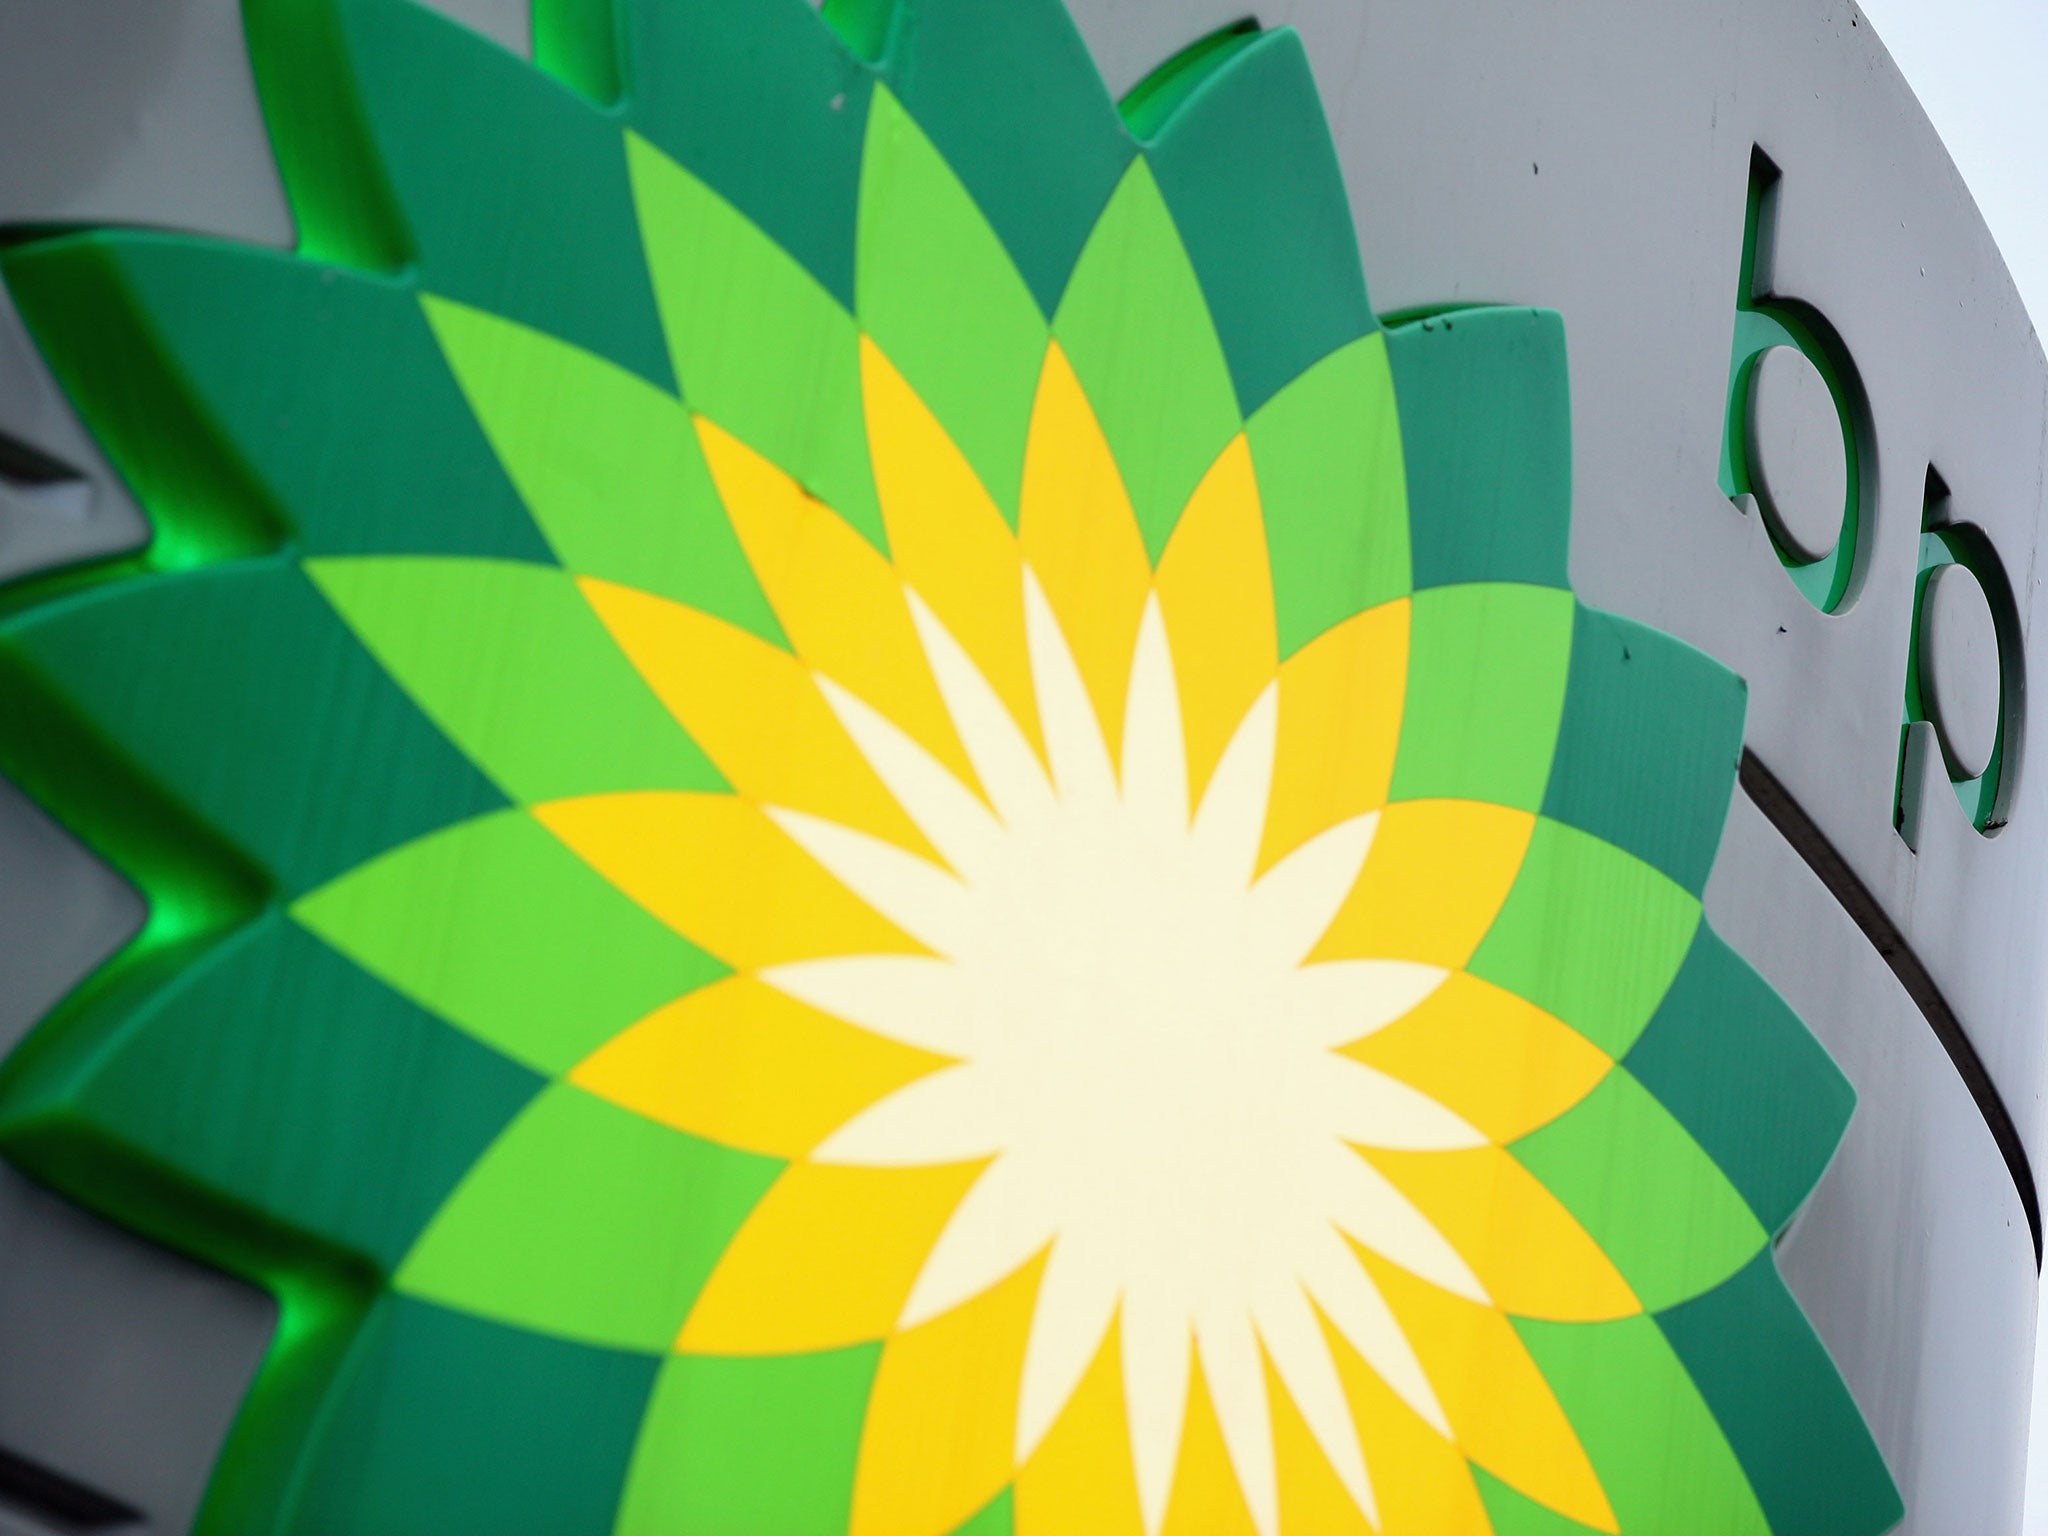 According to a new report, multinational firms such as BP and E.ON have been enjoying privileged access to key European climate policymakers